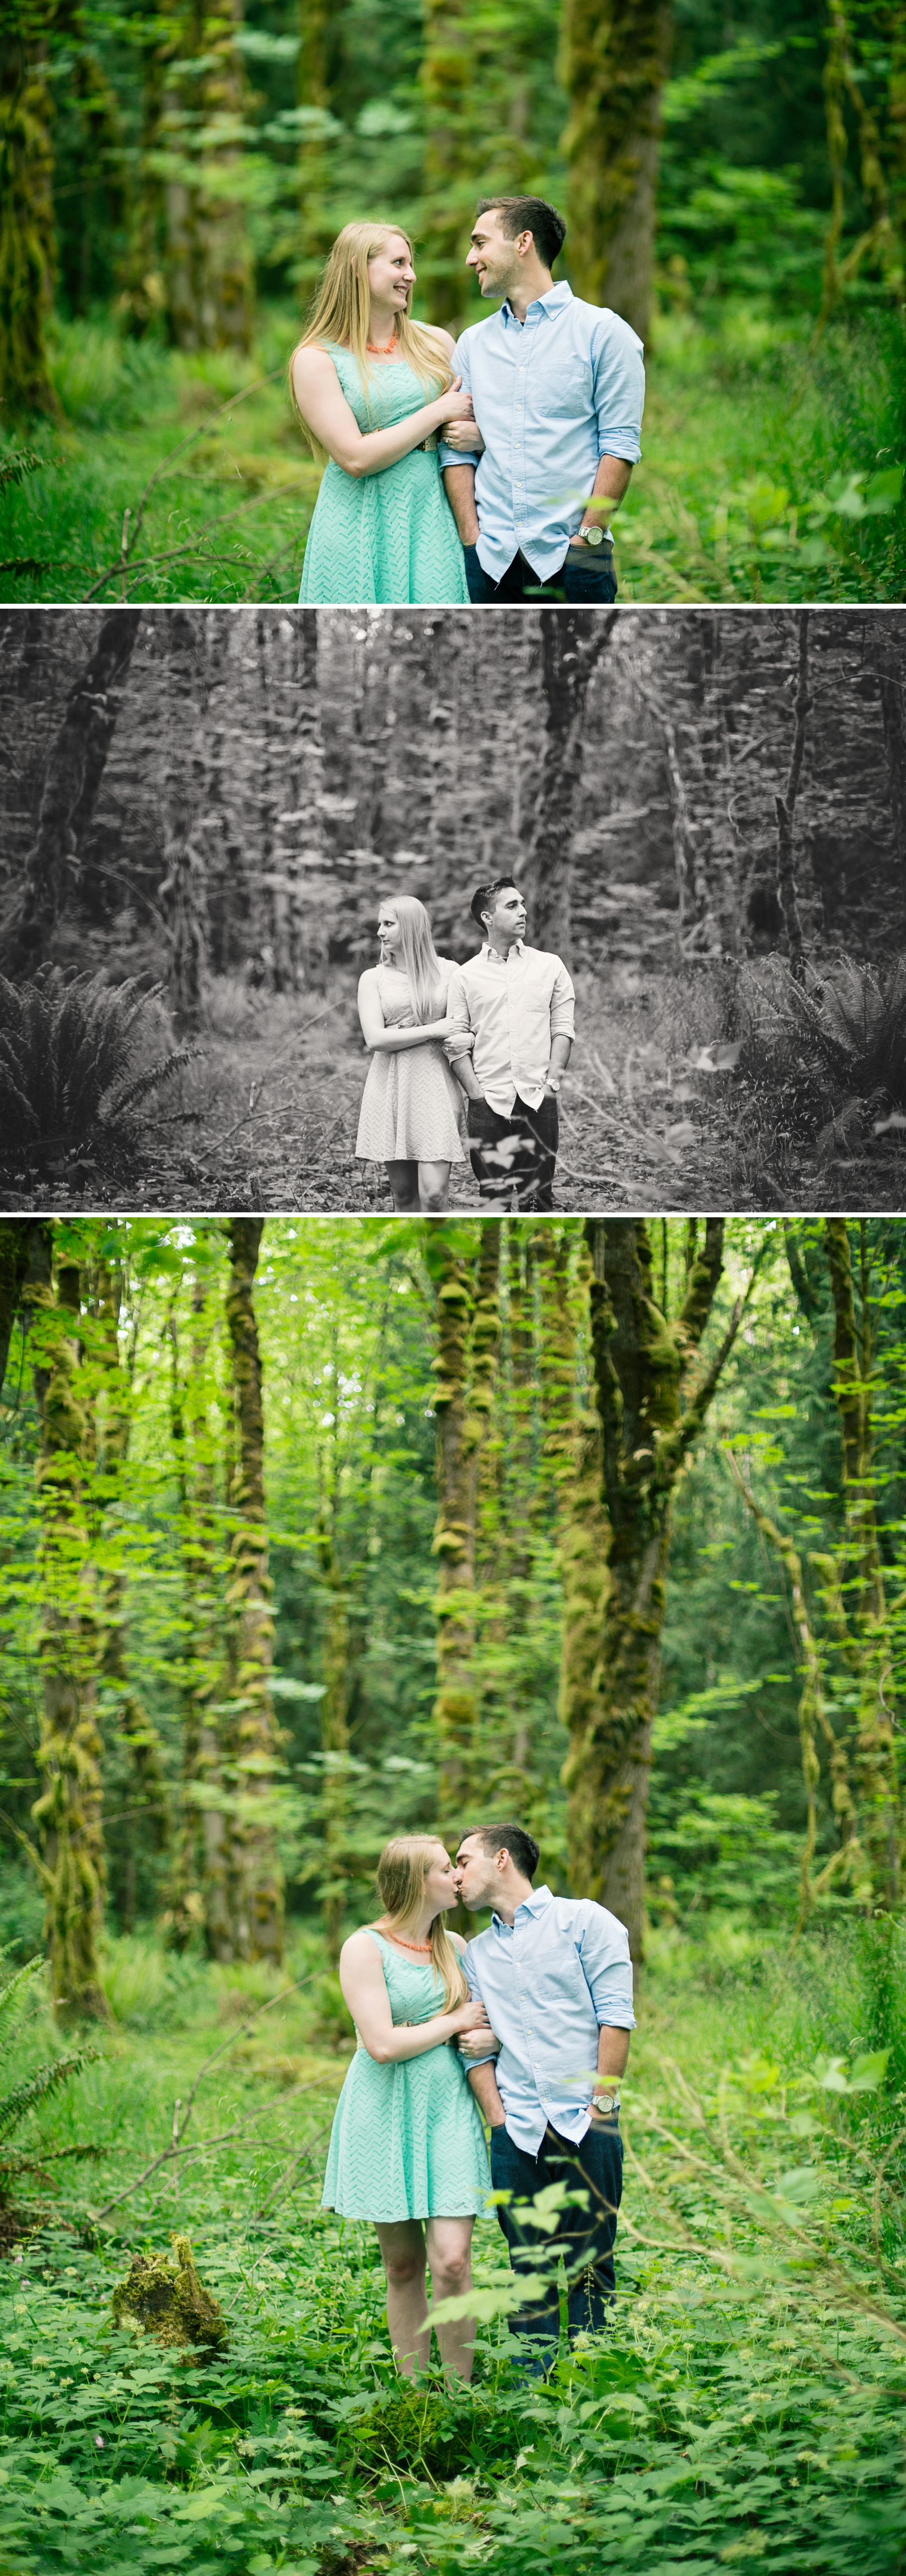 5-Issaquah-Hiking-Engagement-Photographer-Forest-Mossy-Woodland-Ferns-Tradition-Lake-Loop-Trail-Seattle-Wedding-Photography-by-Betty-Elaine